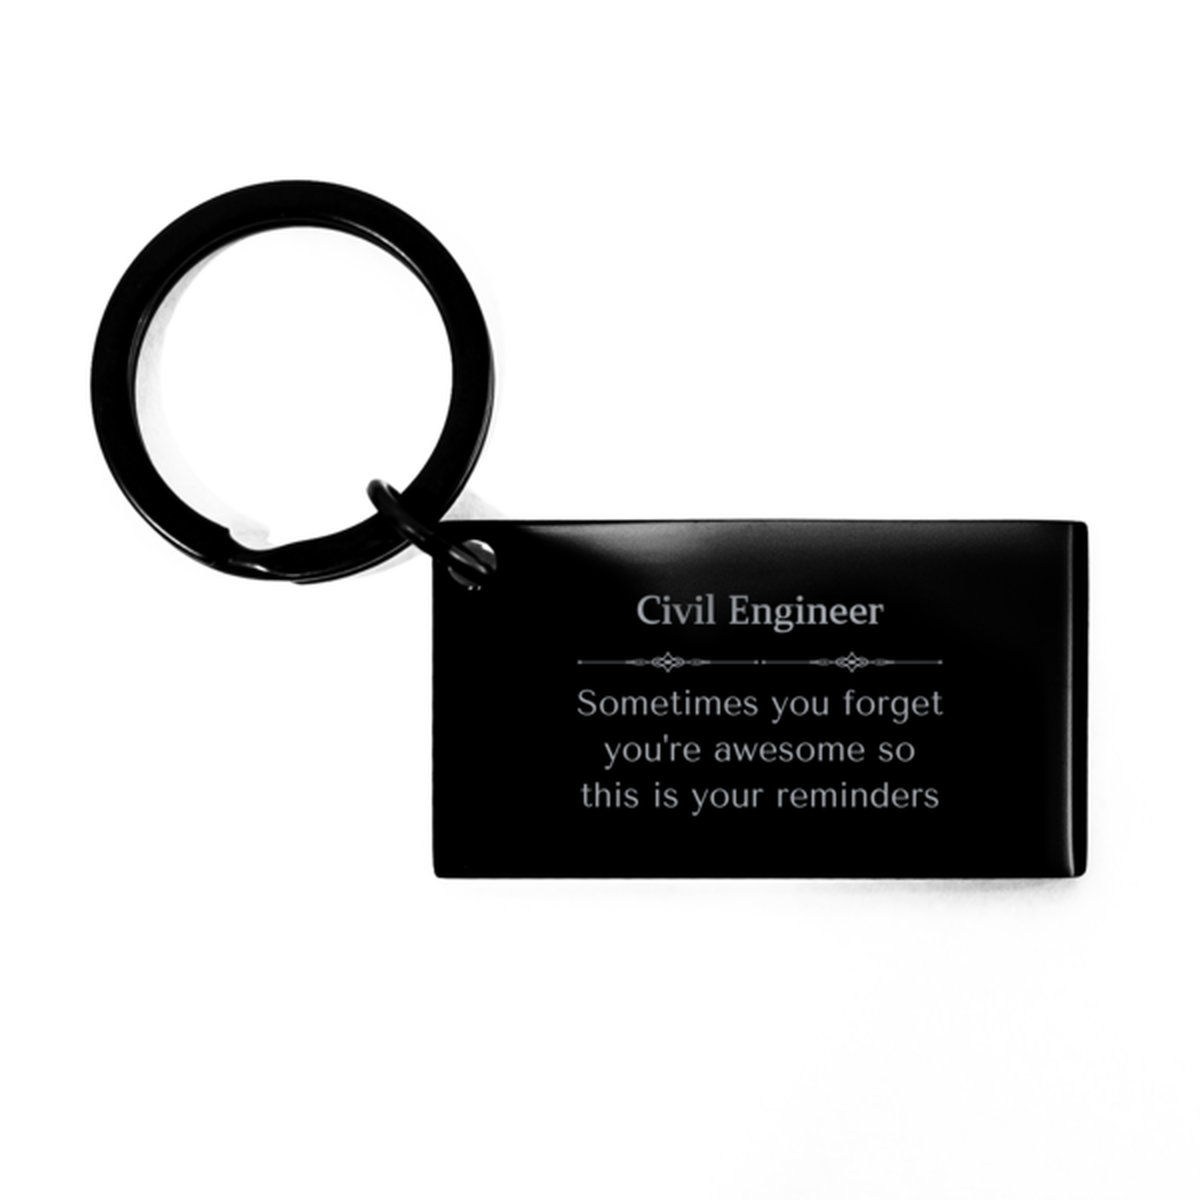 Sentimental Civil Engineer Keychain, Doctor Sometimes you forget you're awesome so this is your reminders, Graduation Christmas Birthday Gifts for Civil Engineer, Men, Women, Coworkers